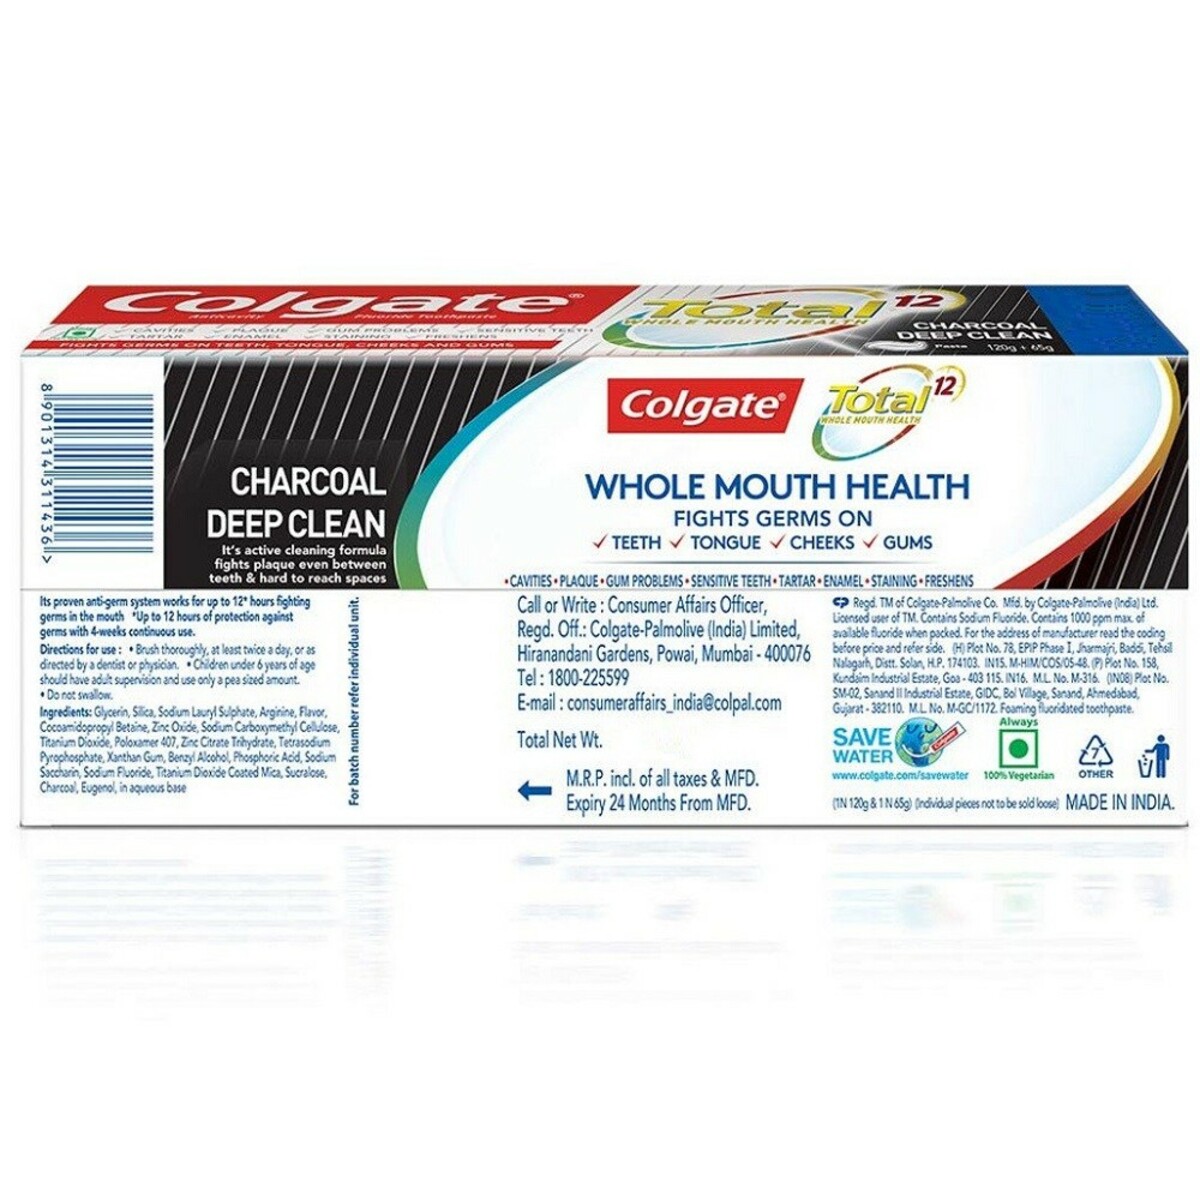 Colgate Tooth Paste  Charcoal Deep Clean 120g+65g Free